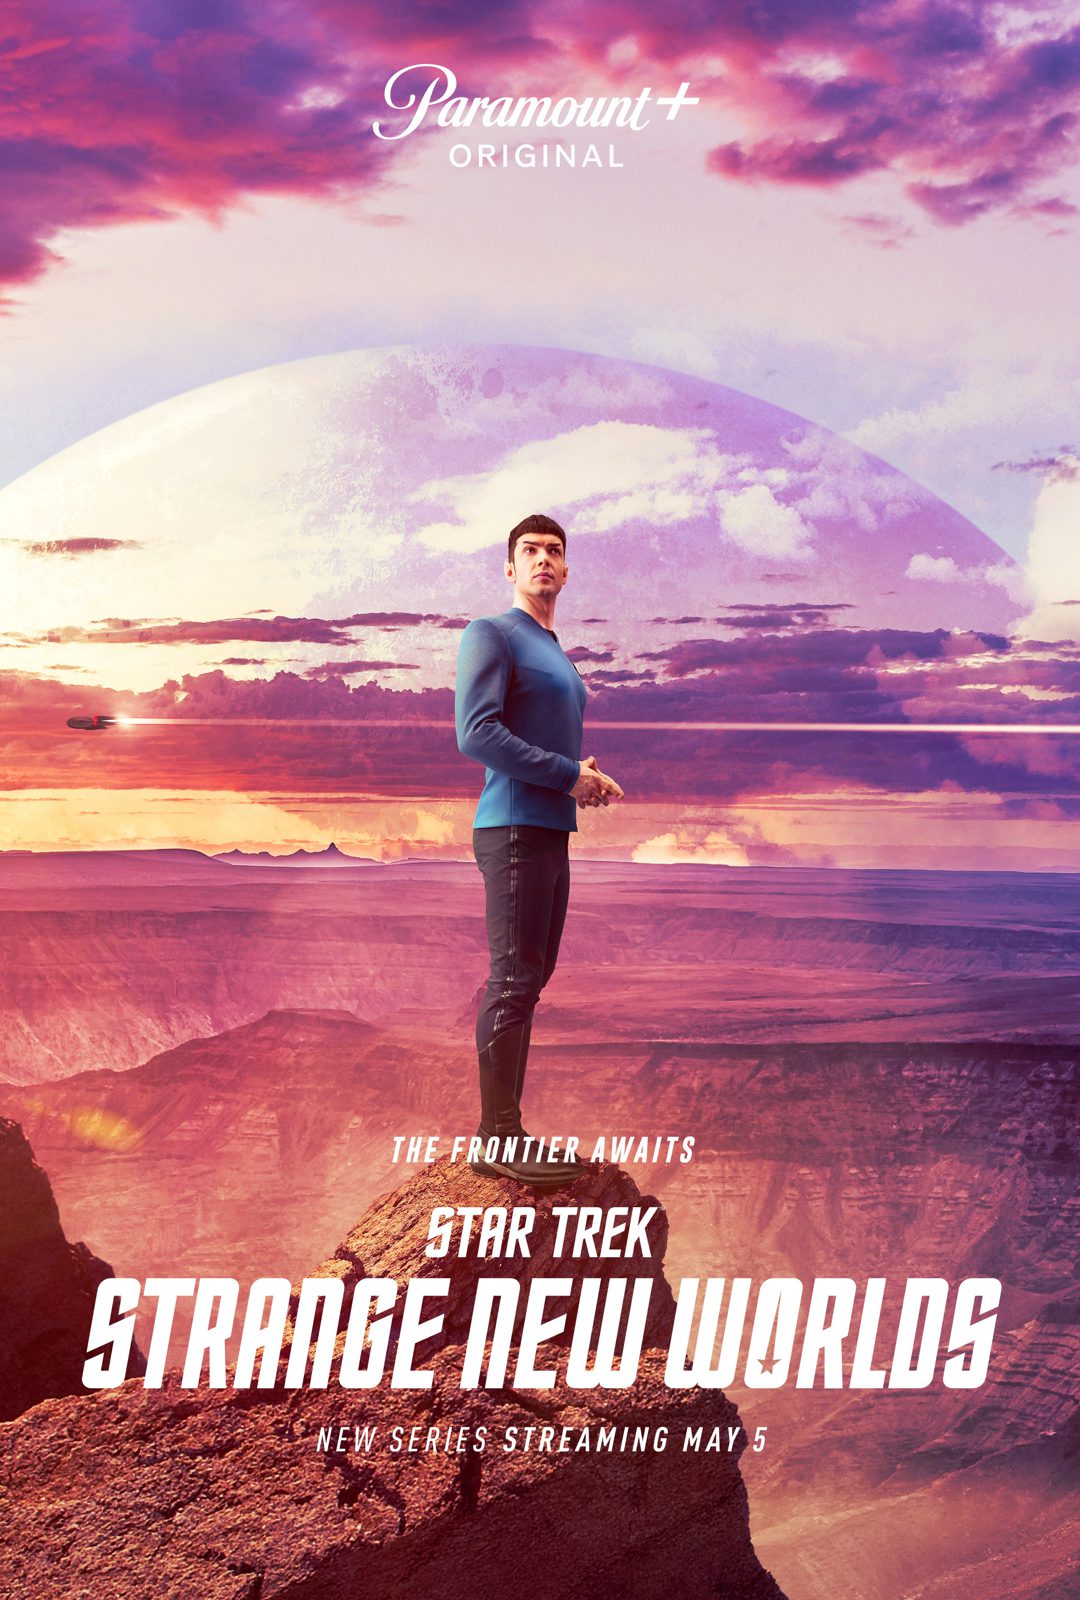 This week's previously released character poster for Spock, without his full name. Head on over to TrekCore to see the updated version. (Image: Paramount)